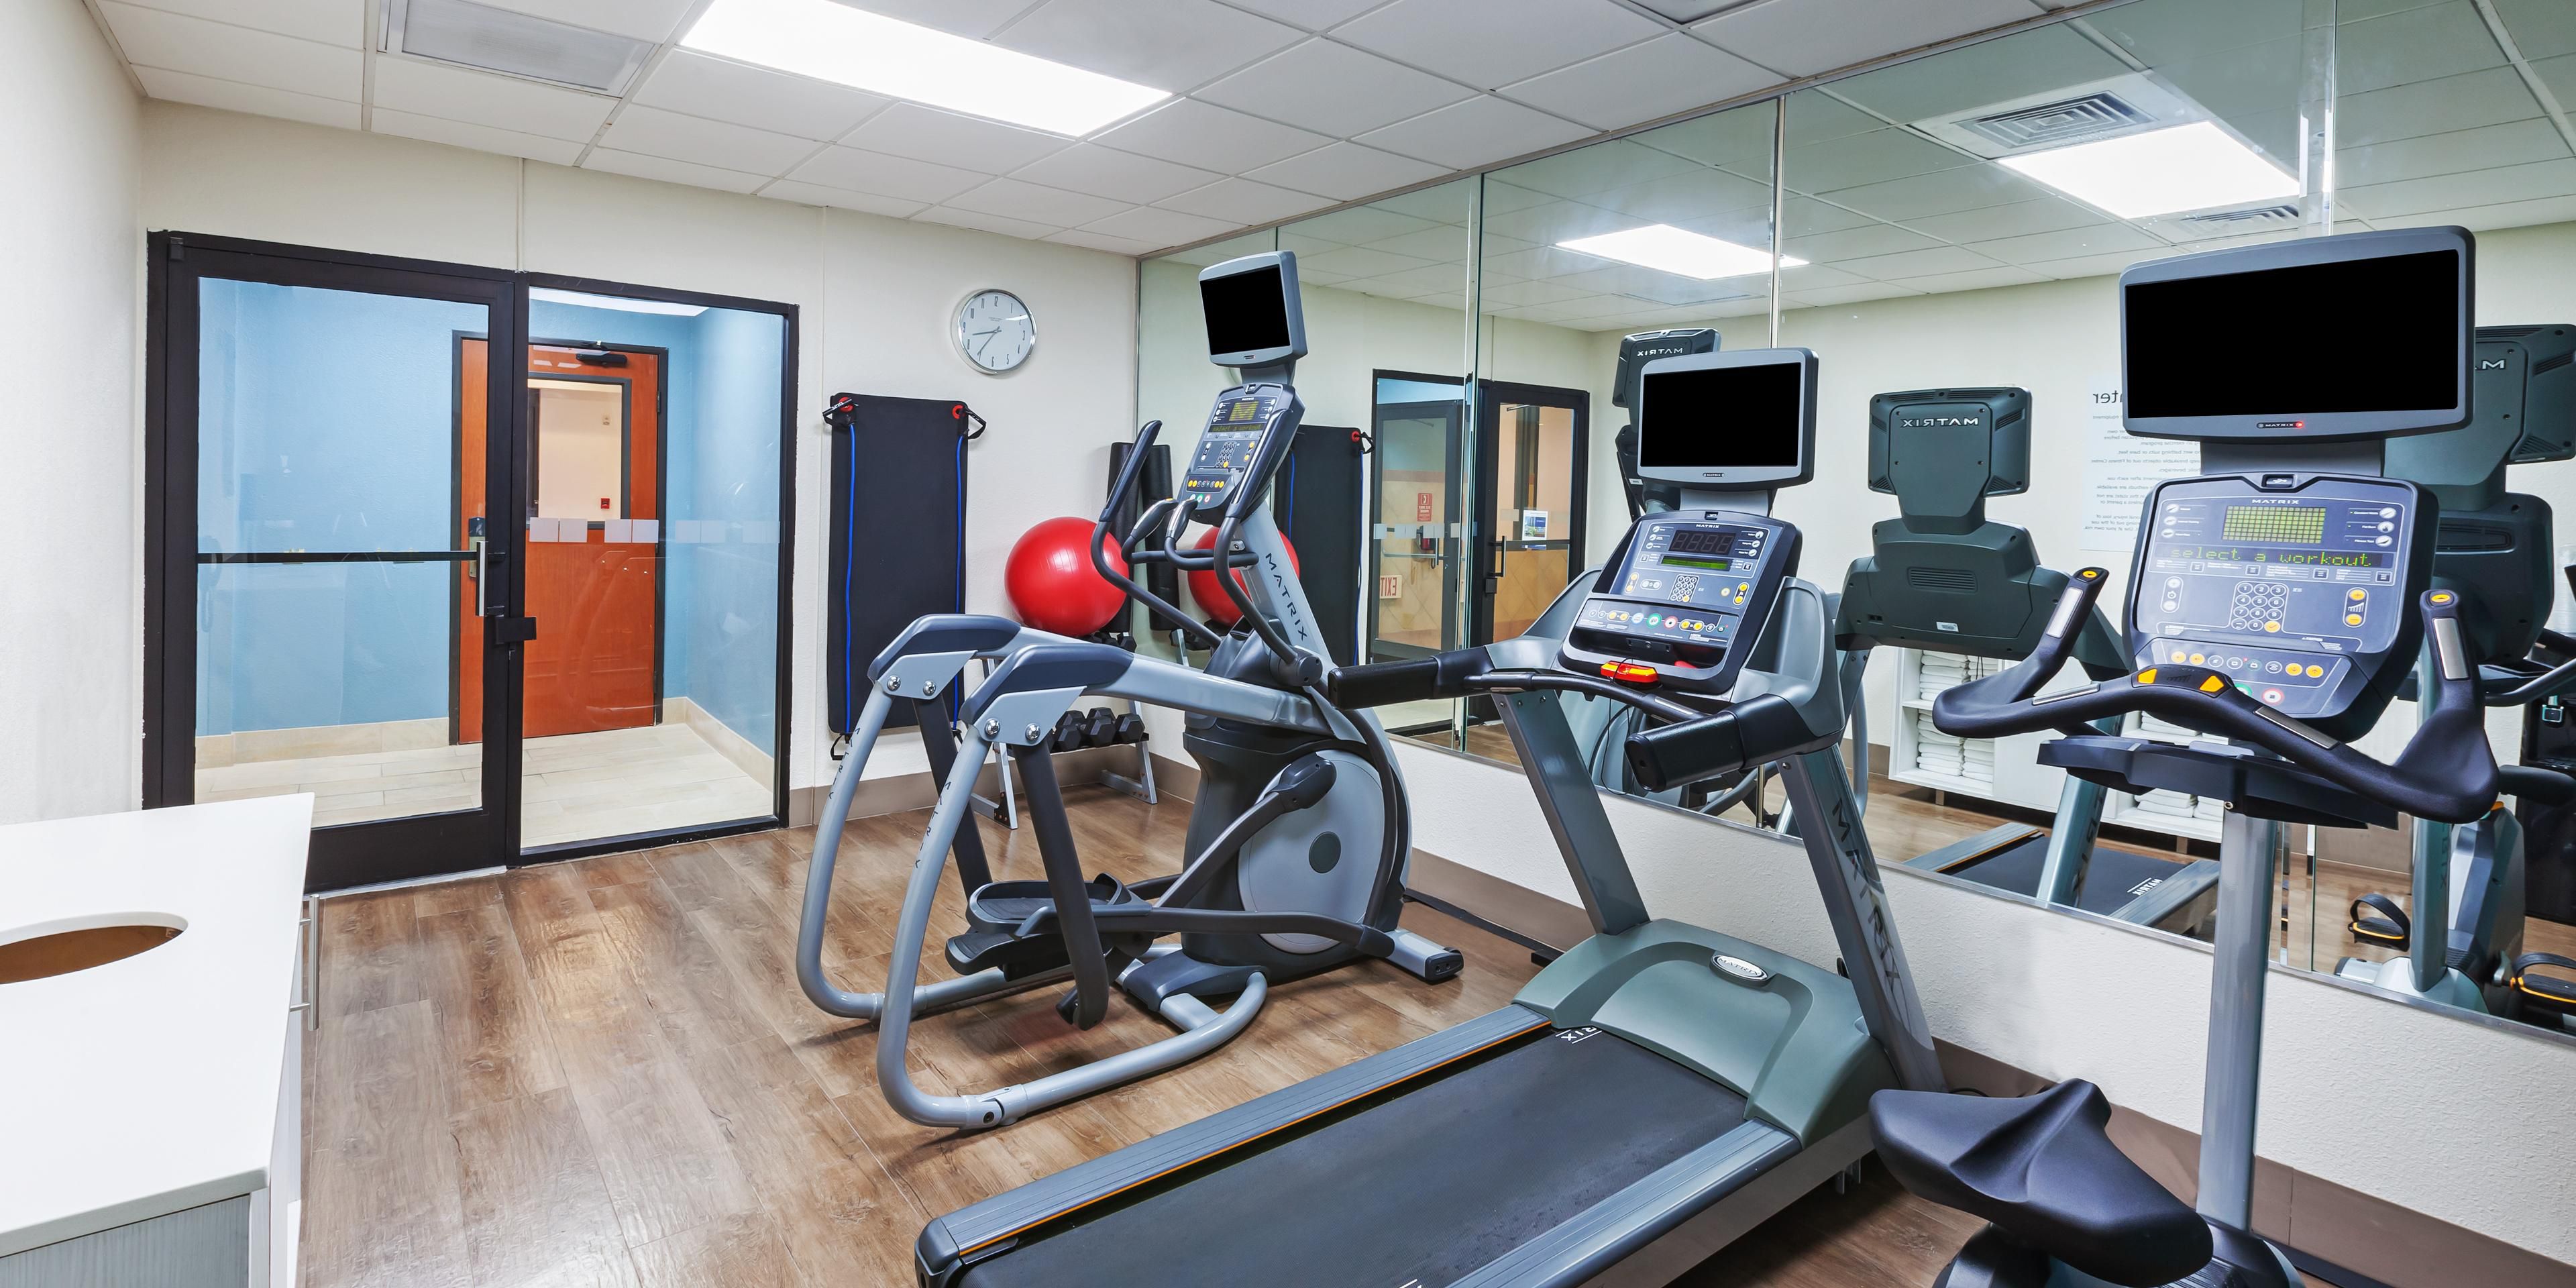 Fit travelers, don't sweat it, we've got you covered!  You're welcome to go for a swim in our heated indoor pool or enjoy an invigorating workout in our complimentary Fitness Center.  You'll find treadmills, elliptical machines, free weights or a stationary bicycle available just for you!  Stay smart and fit when you stay with us!